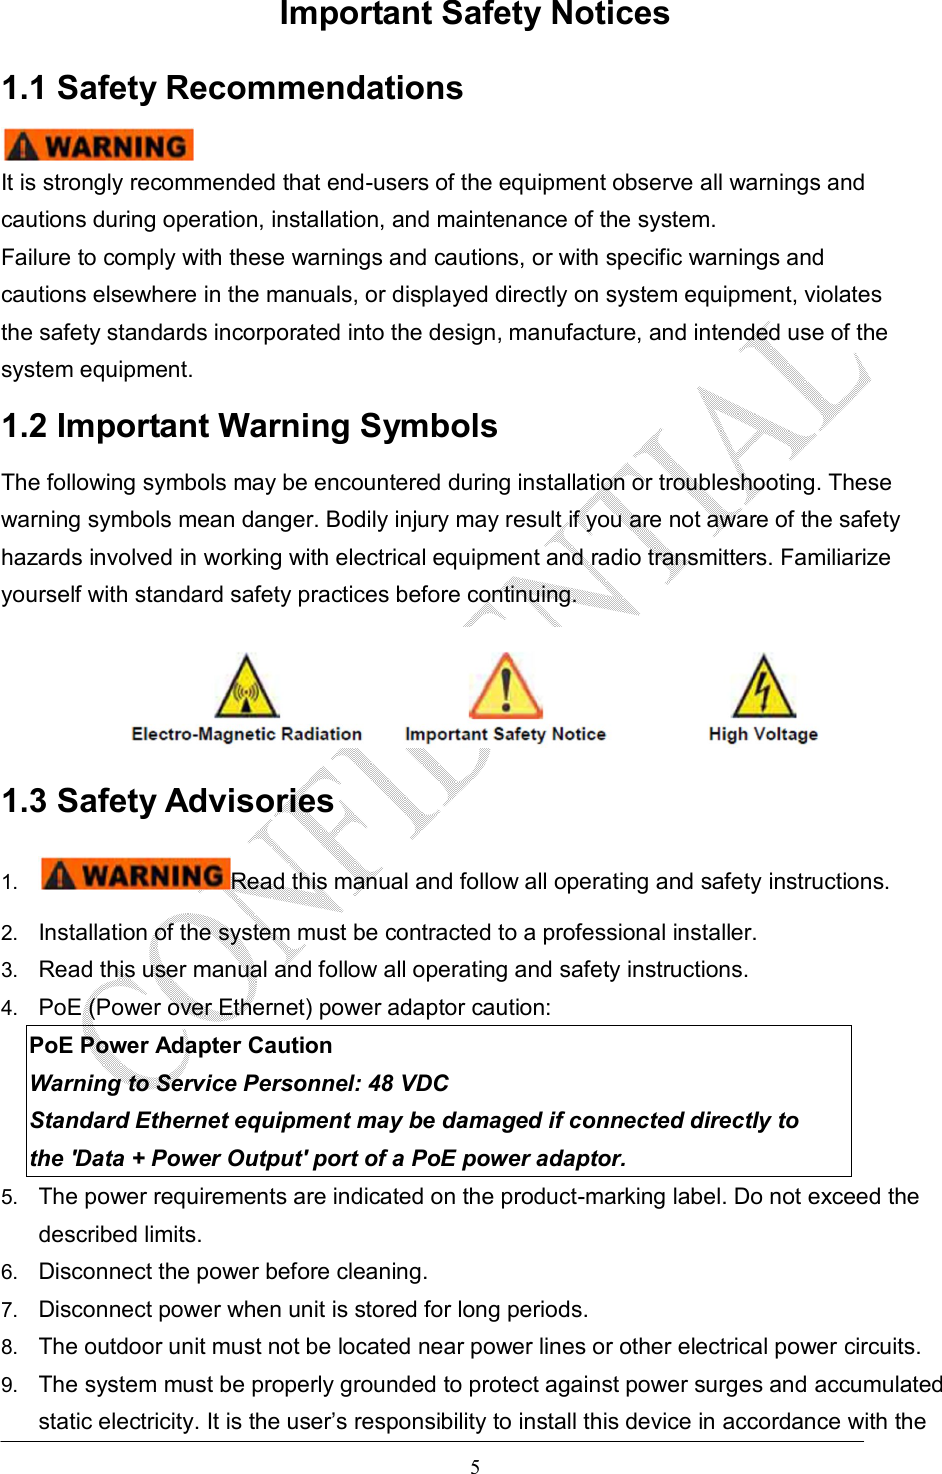   5 Important Safety Notices 1.1 Safety Recommendations  It is strongly recommended that end-users of the equipment observe all warnings and cautions during operation, installation, and maintenance of the system. Failure to comply with these warnings and cautions, or with specific warnings and cautions elsewhere in the manuals, or displayed directly on system equipment, violates the safety standards incorporated into the design, manufacture, and intended use of the system equipment. 1.2 Important Warning Symbols The following symbols may be encountered during installation or troubleshooting. These warning symbols mean danger. Bodily injury may result if you are not aware of the safety hazards involved in working with electrical equipment and radio transmitters. Familiarize yourself with standard safety practices before continuing.  1.3 Safety Advisories 1.  Read this manual and follow all operating and safety instructions. 2.  Installation of the system must be contracted to a professional installer. 3.  Read this user manual and follow all operating and safety instructions. 4.  PoE (Power over Ethernet) power adaptor caution: PoE Power Adapter Caution Warning to Service Personnel: 48 VDC Standard Ethernet equipment may be damaged if connected directly to the &apos;Data + Power Output&apos; port of a PoE power adaptor. 5.  The power requirements are indicated on the product-marking label. Do not exceed the described limits. 6.  Disconnect the power before cleaning. 7.  Disconnect power when unit is stored for long periods. 8.  The outdoor unit must not be located near power lines or other electrical power circuits. 9.  The system must be properly grounded to protect against power surges and accumulated static electricity. It is the user’s responsibility to install this device in accordance with the 